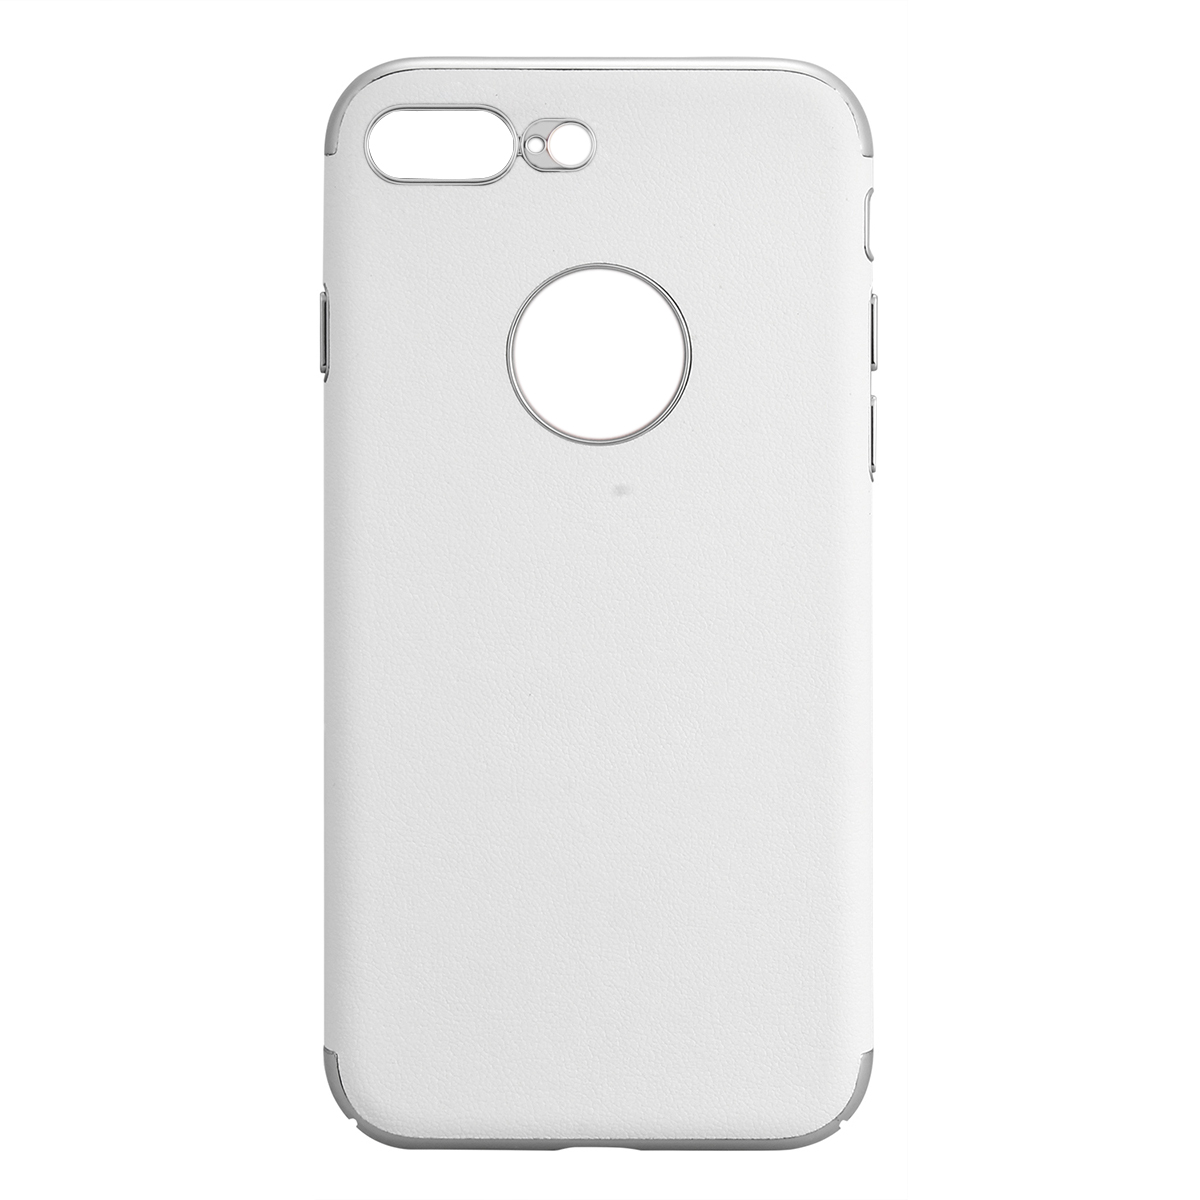 Luxury Hard PC Protective Back Phone Case Cover for iPhone 7 - White